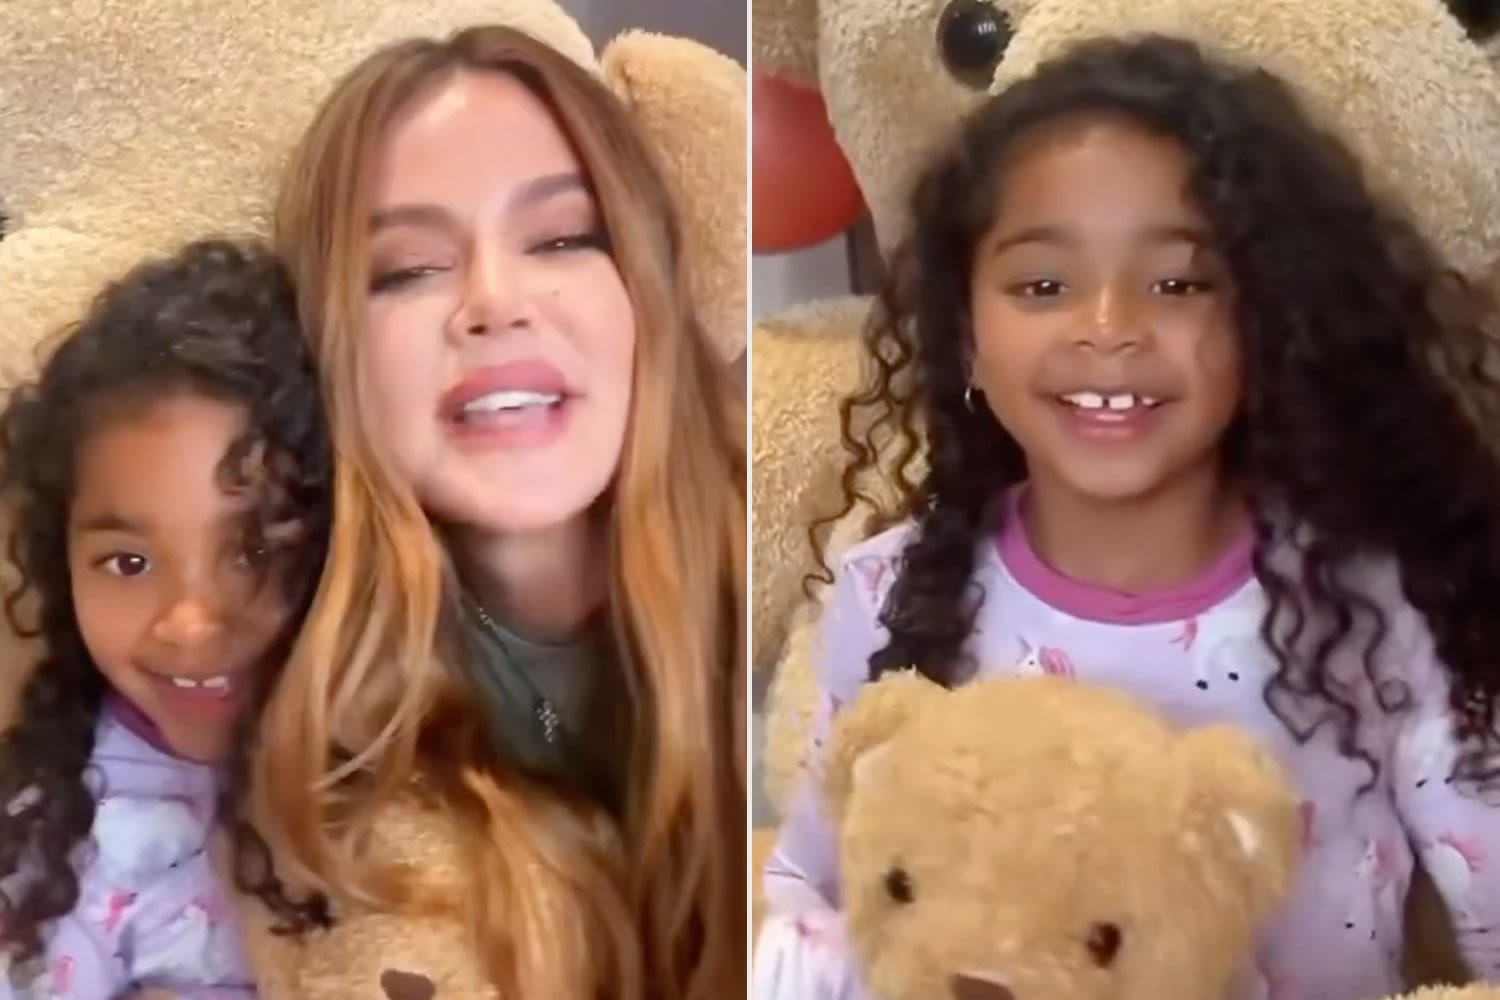 Khloé Kardashian Says She's 'So Happy' for Daughter True, 6, as the 'New Face' of Kid's PJ Brand: 'So Excited'